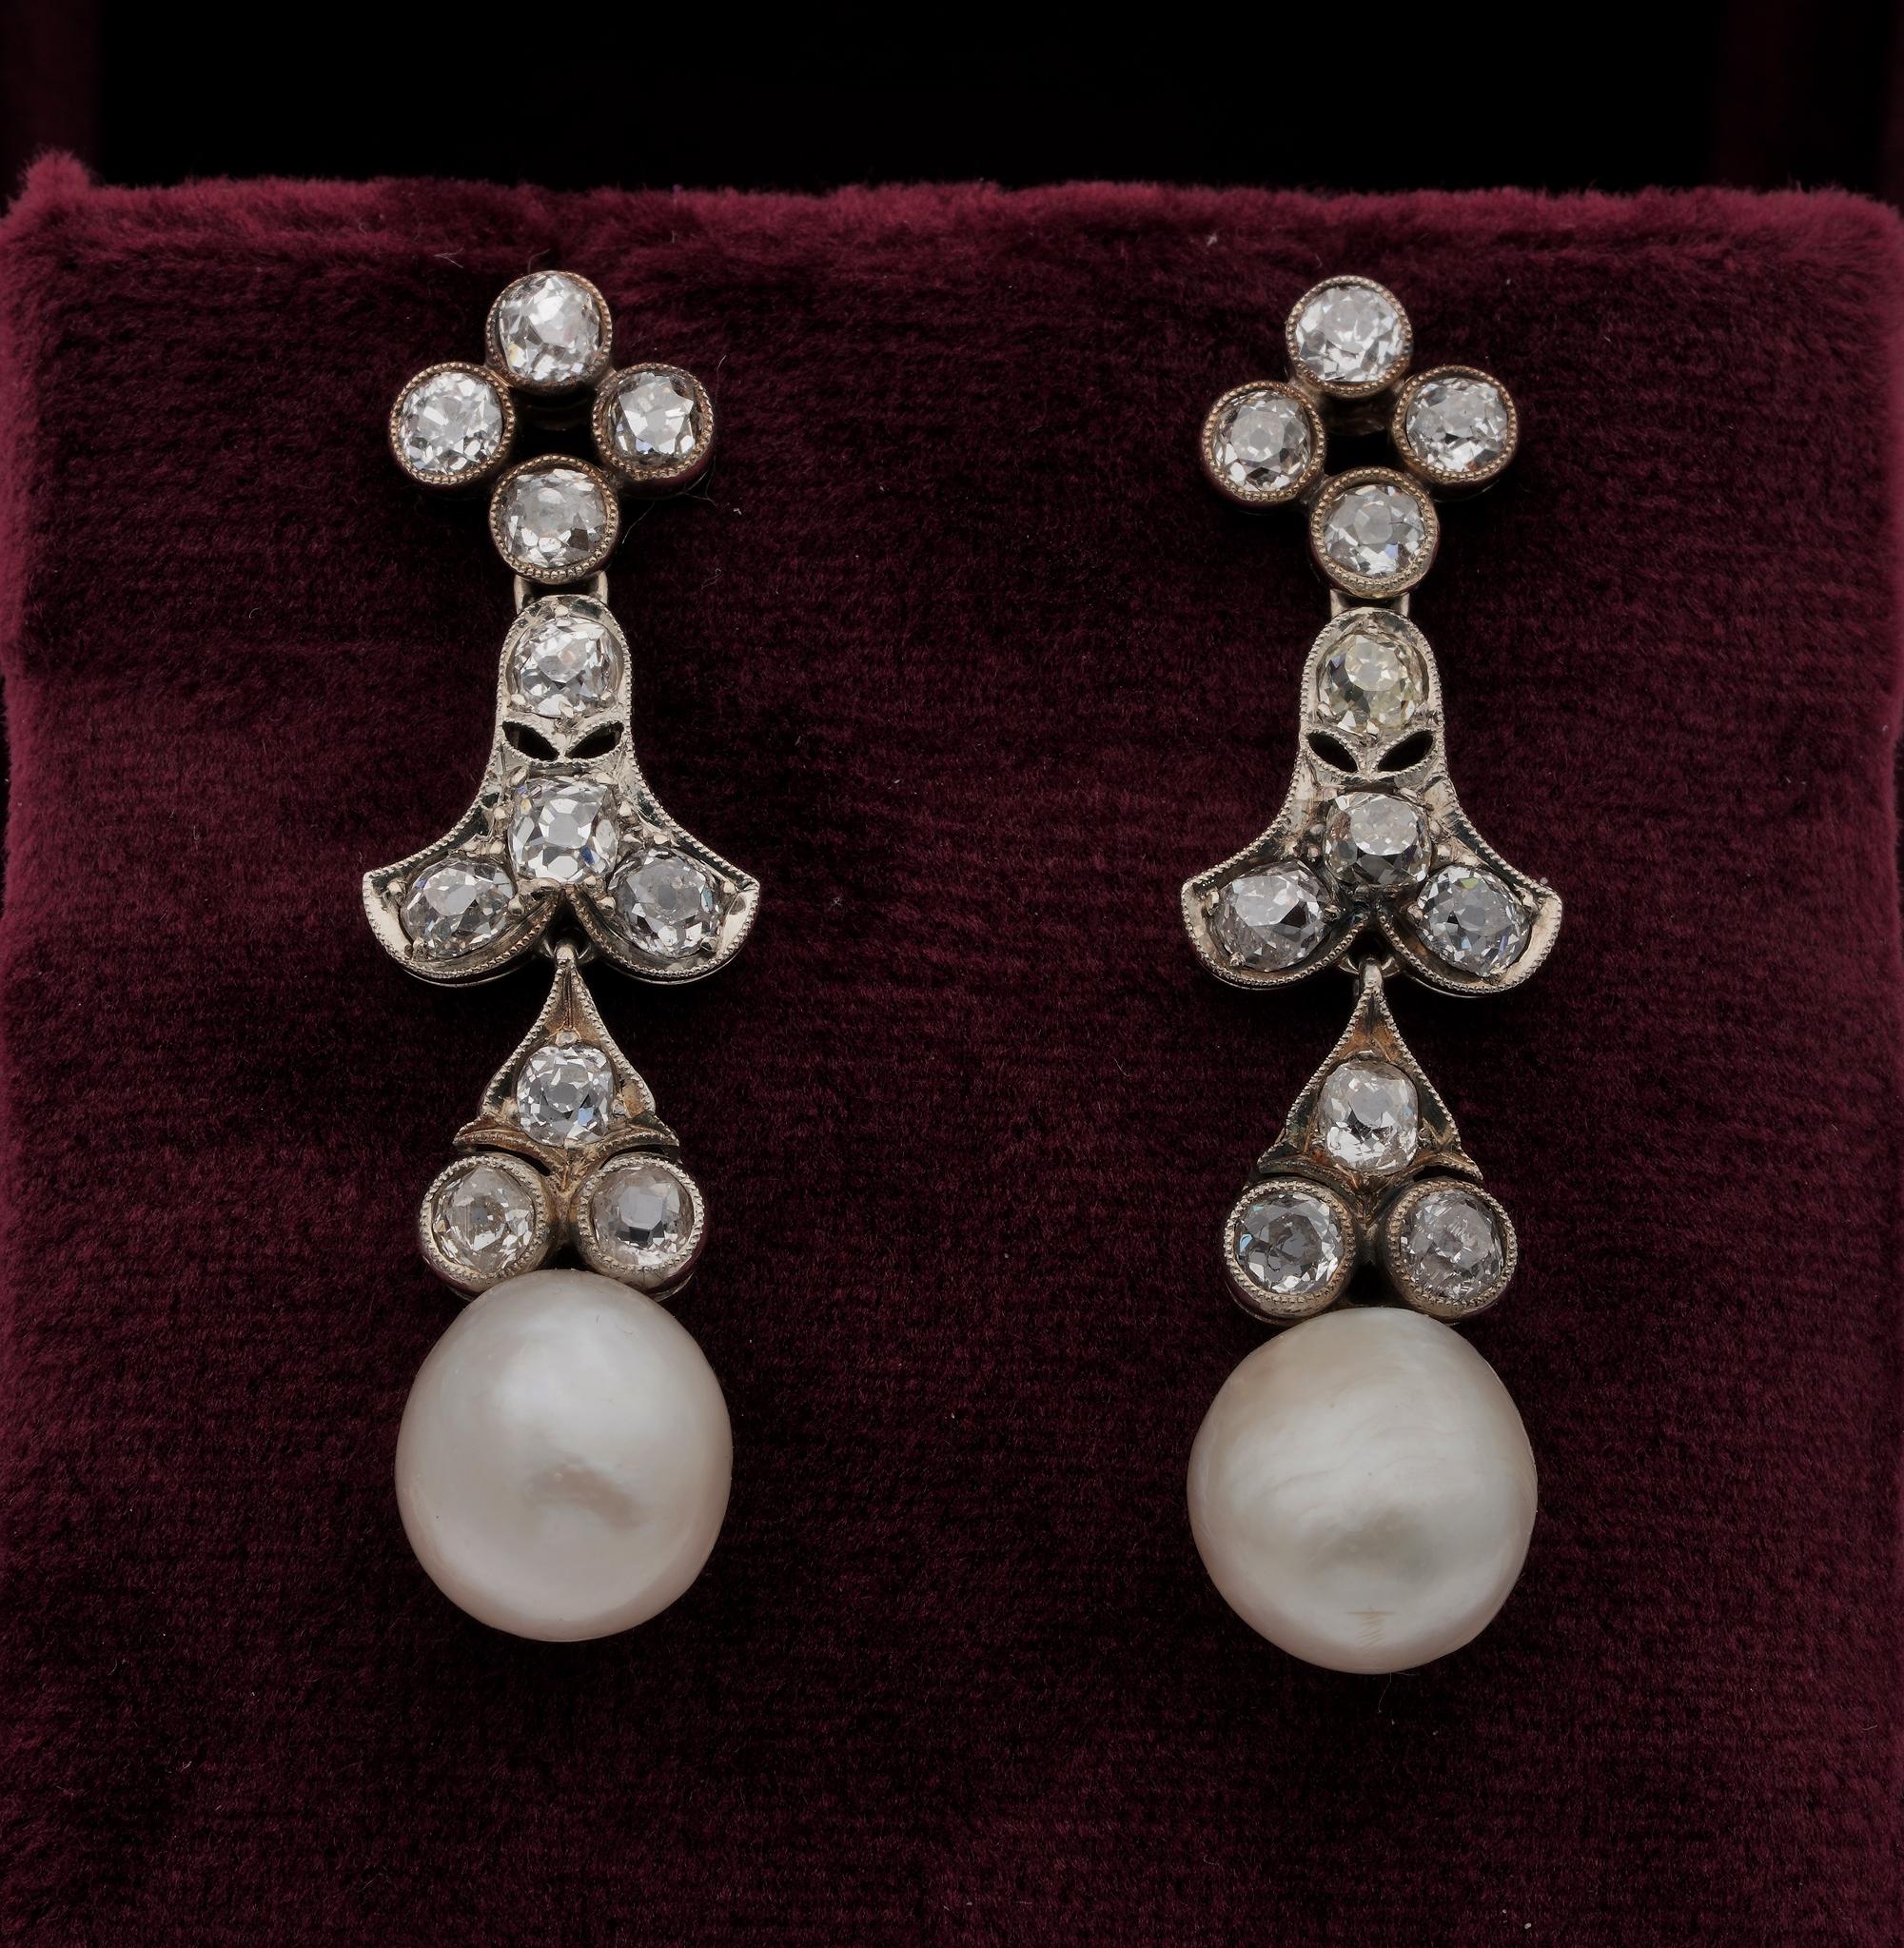 Natural pearls are one of the rarest of gems sought after for their rarity and beauty
Timeless Victorian period Diamond and Pearl earrings, epitome of eternal elegance, hand crafted during the time of 18 Kt solid gold
Superb in design comprising 22